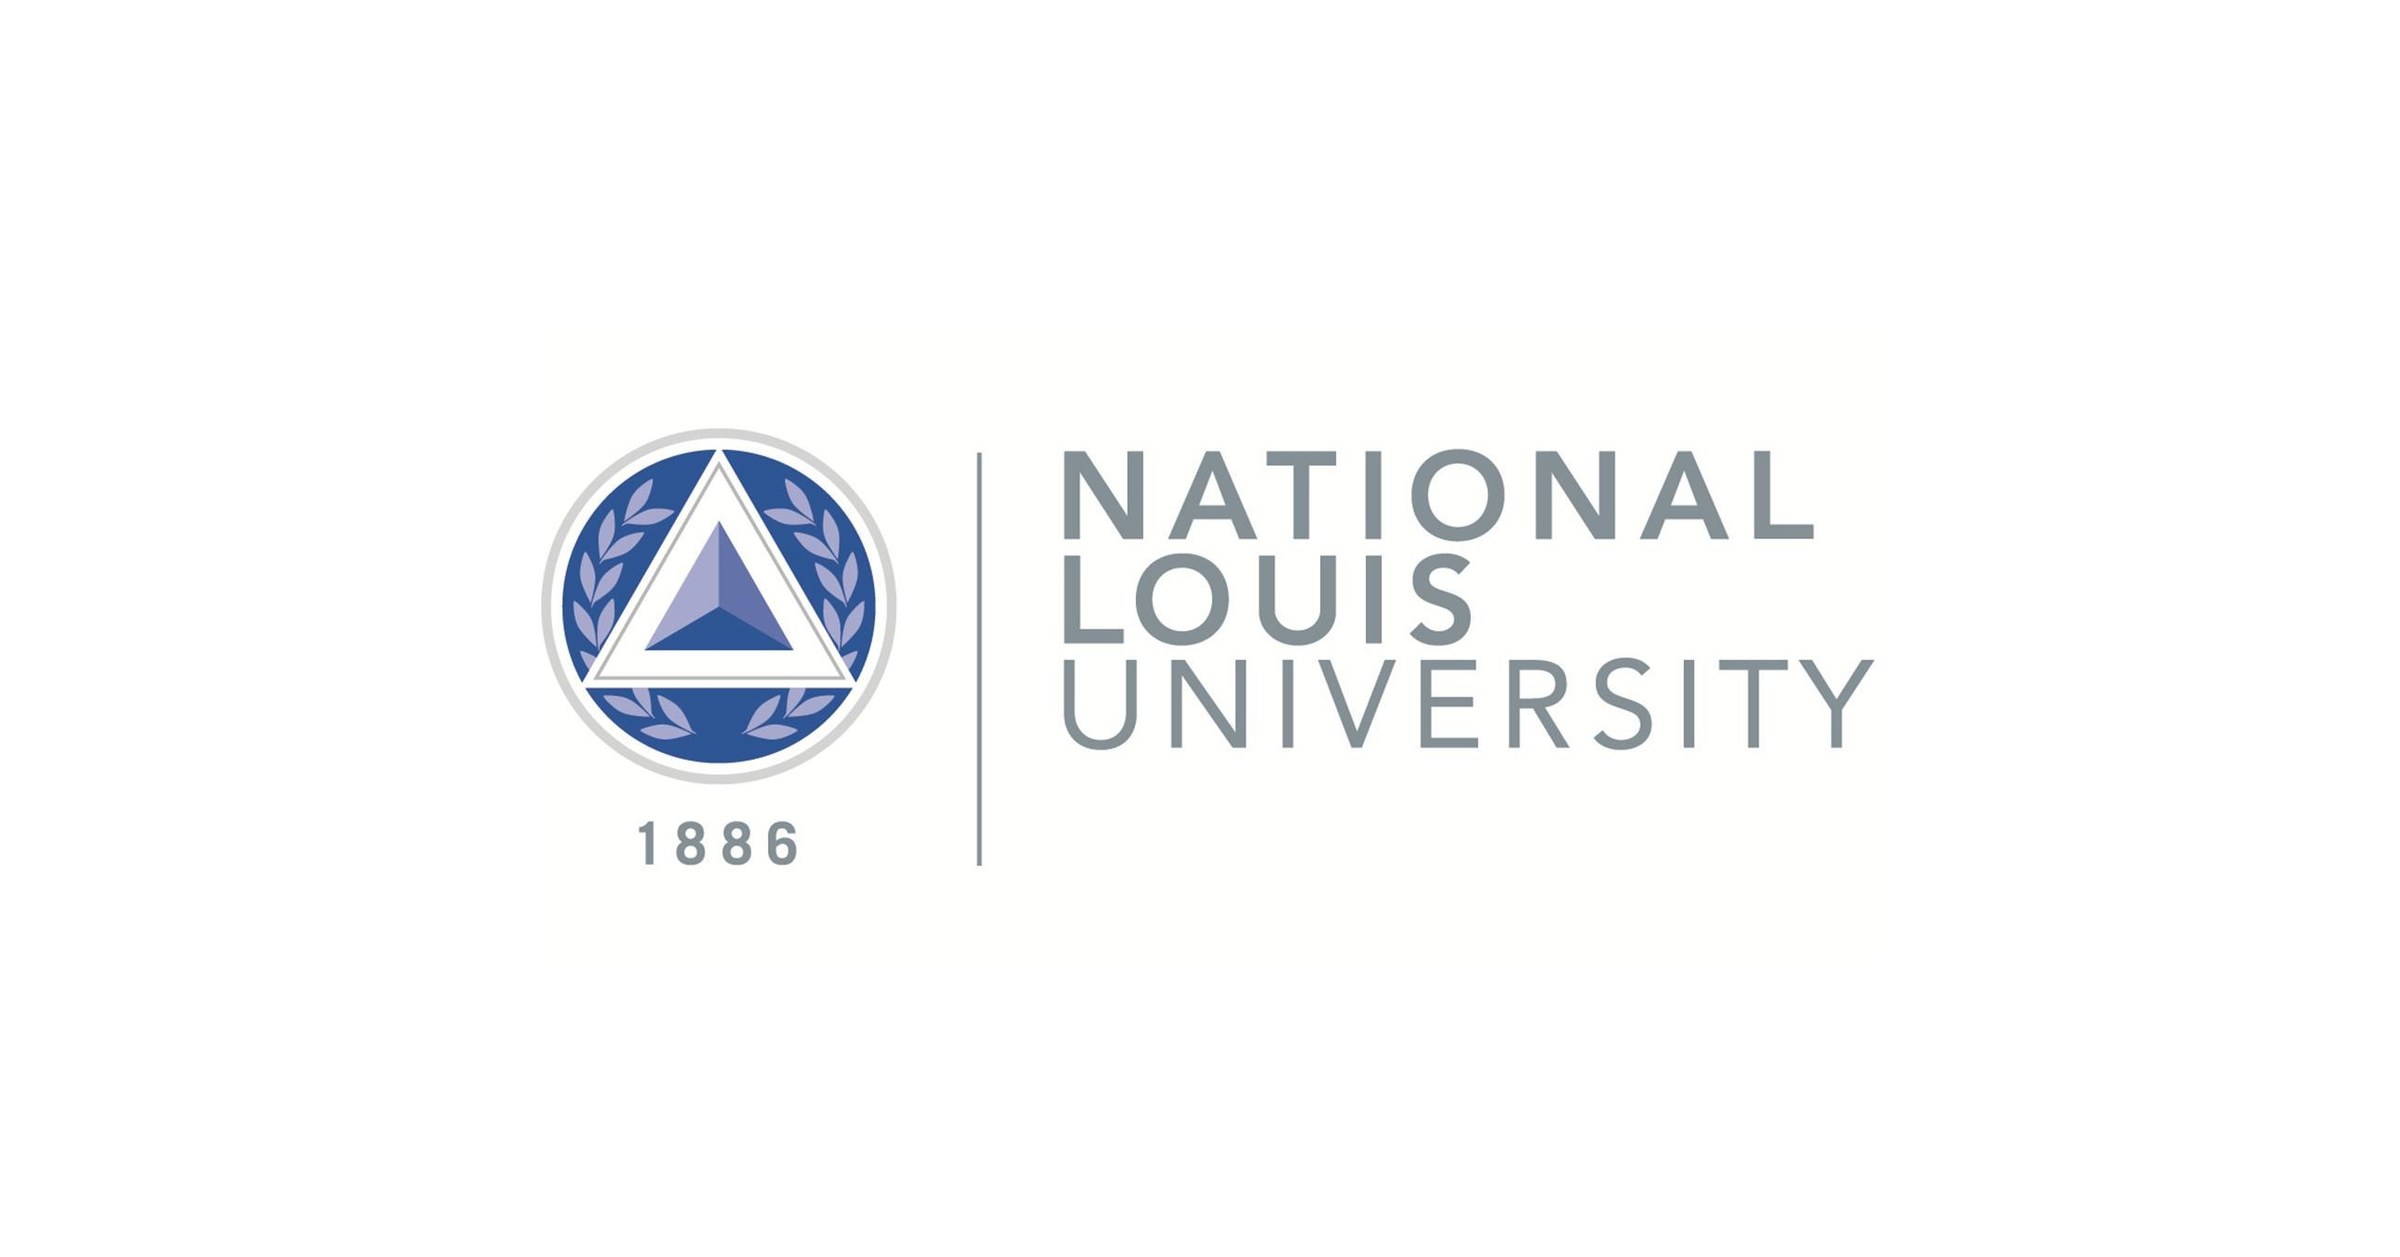 National Louis University Ranked Among Top 20 in the Nation by